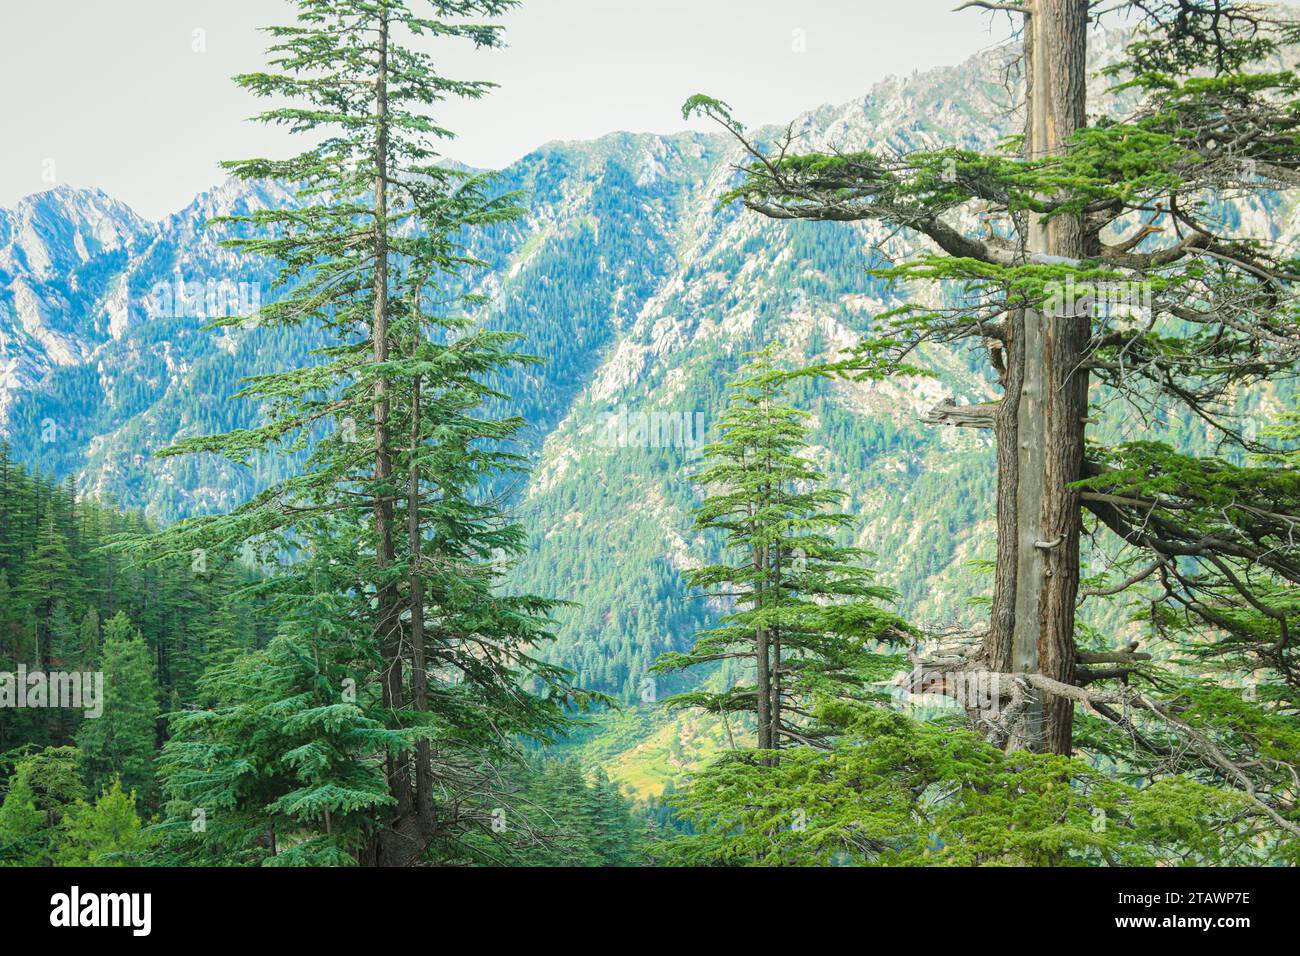 A landscape featuring a lush green forest and trees in nature | Nuristan Afghanistan Stock Photo